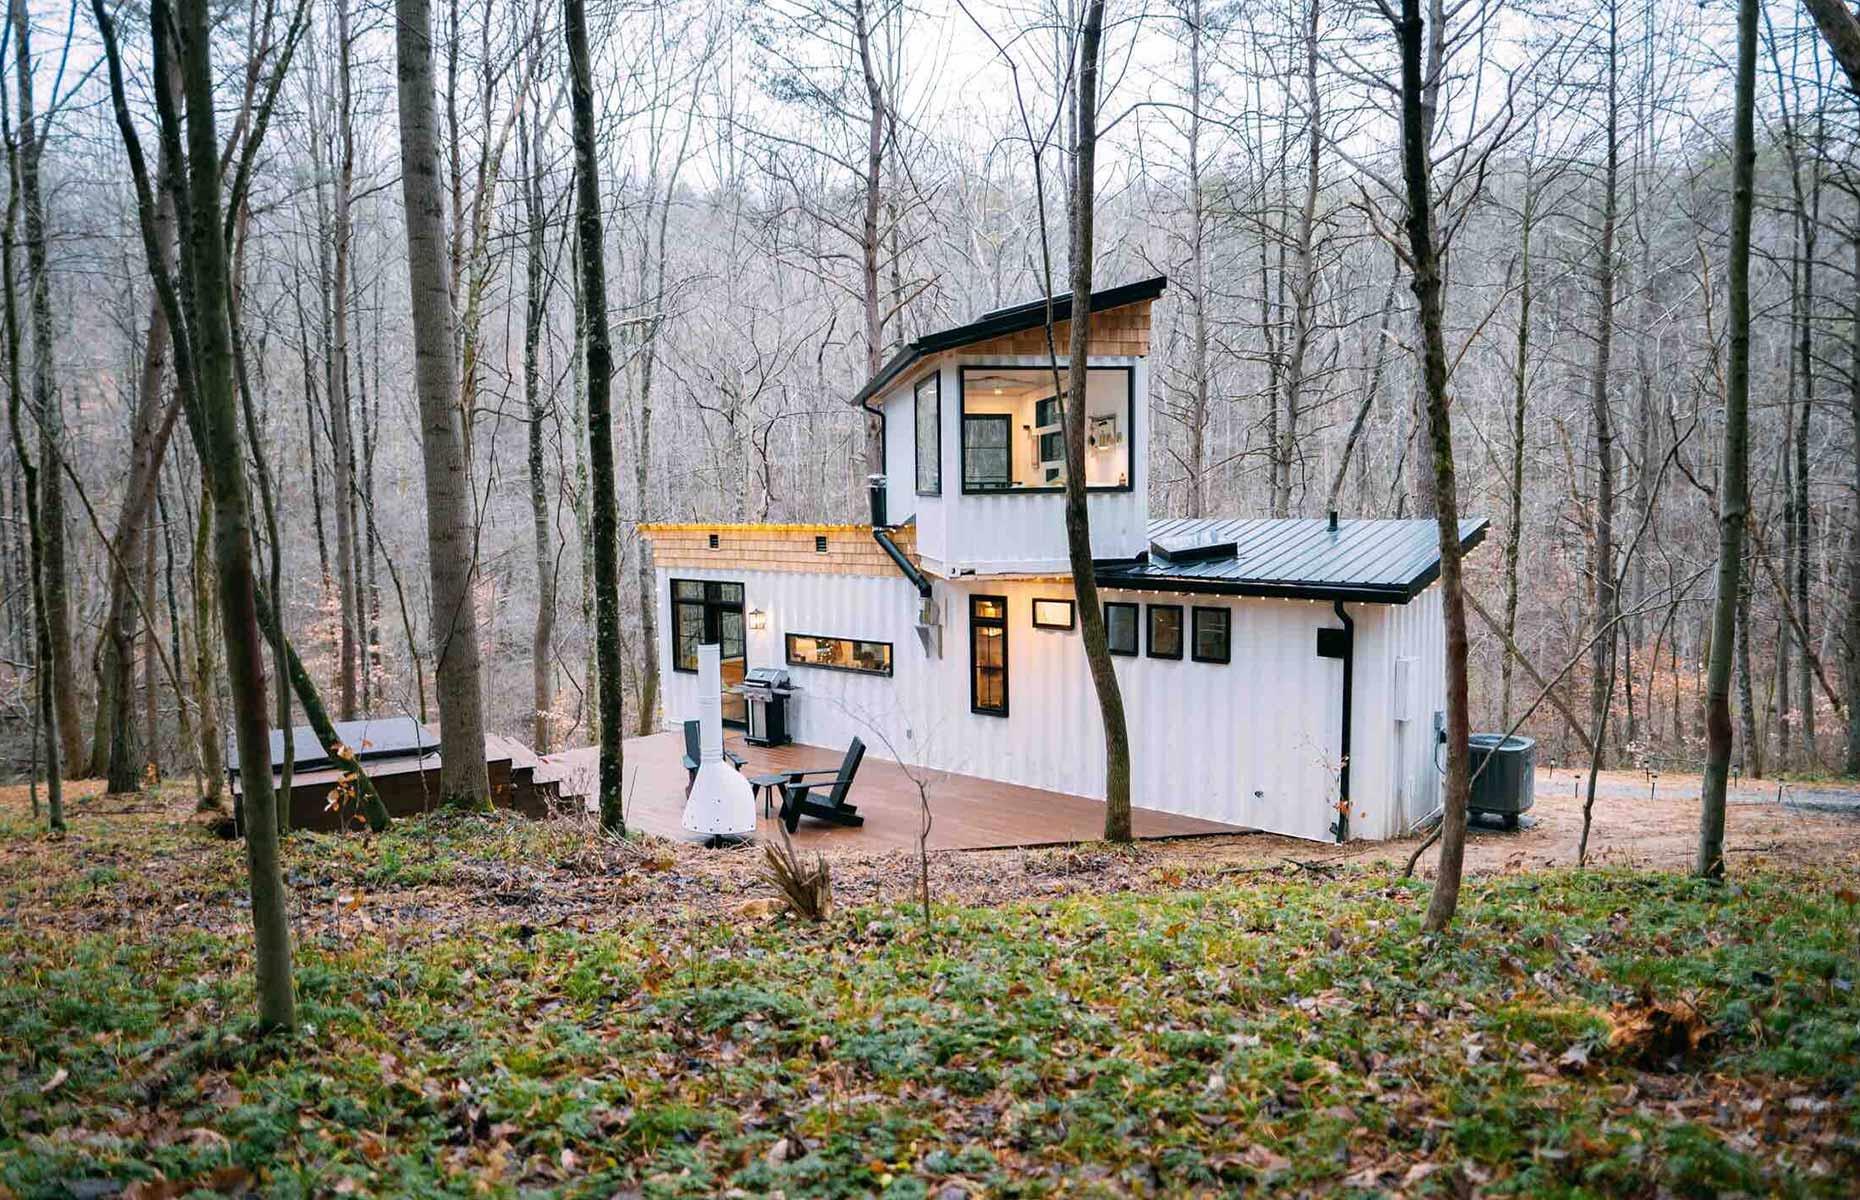 Pin by Joe wilkey on Container home